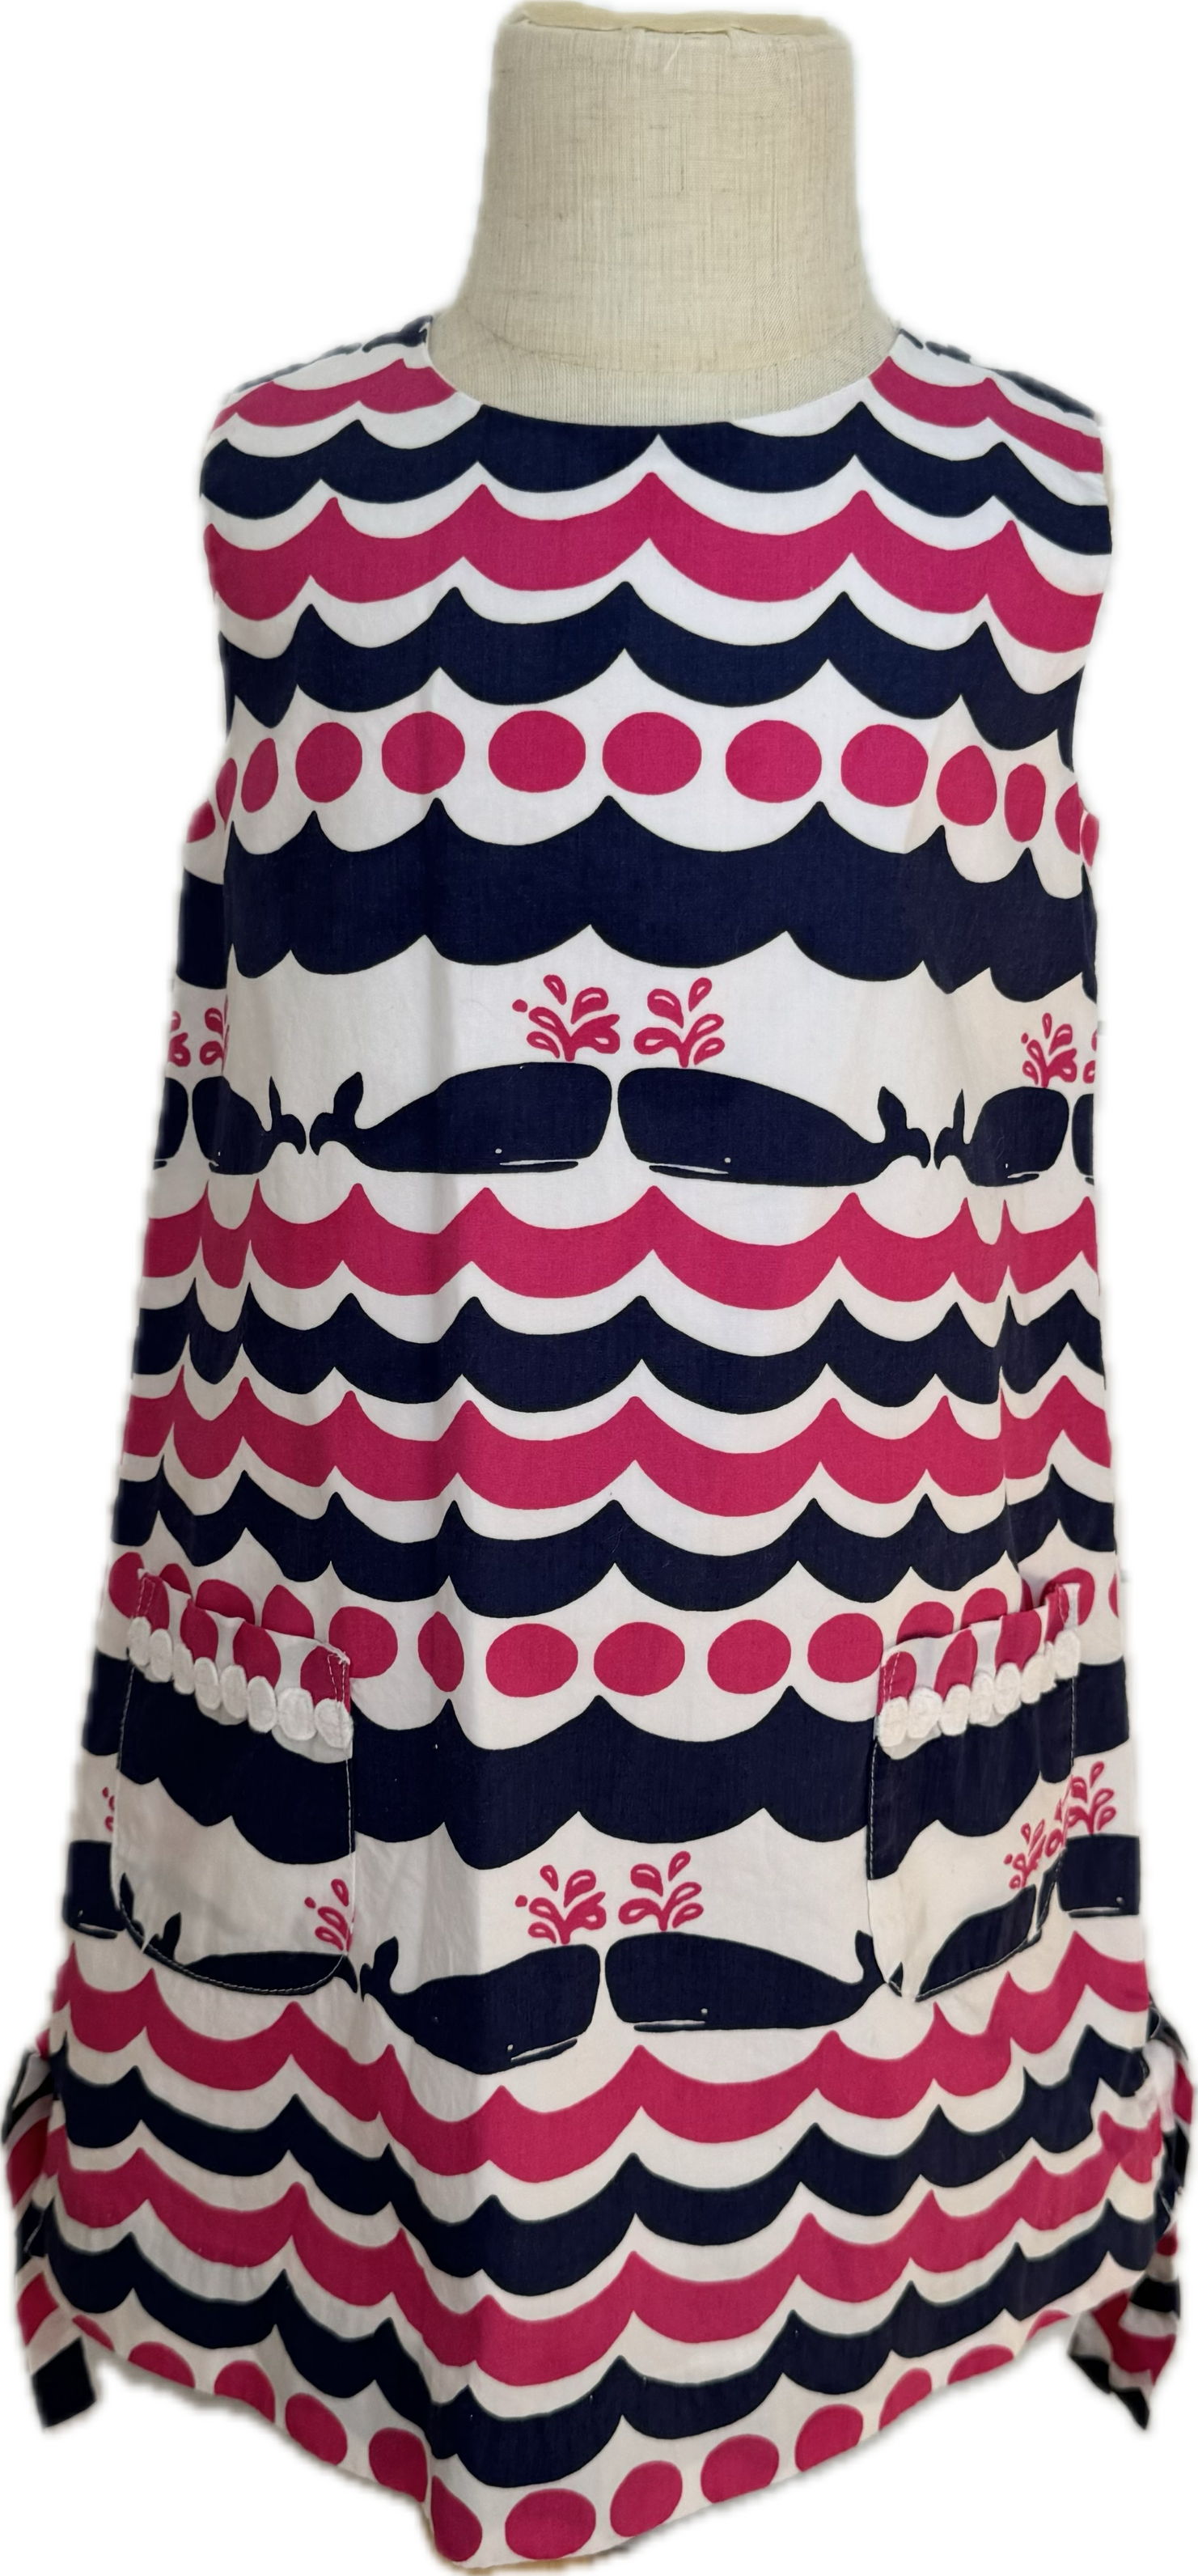 Lilly Pulitzer Dress, Pink/Navy Whale Girls Size 4